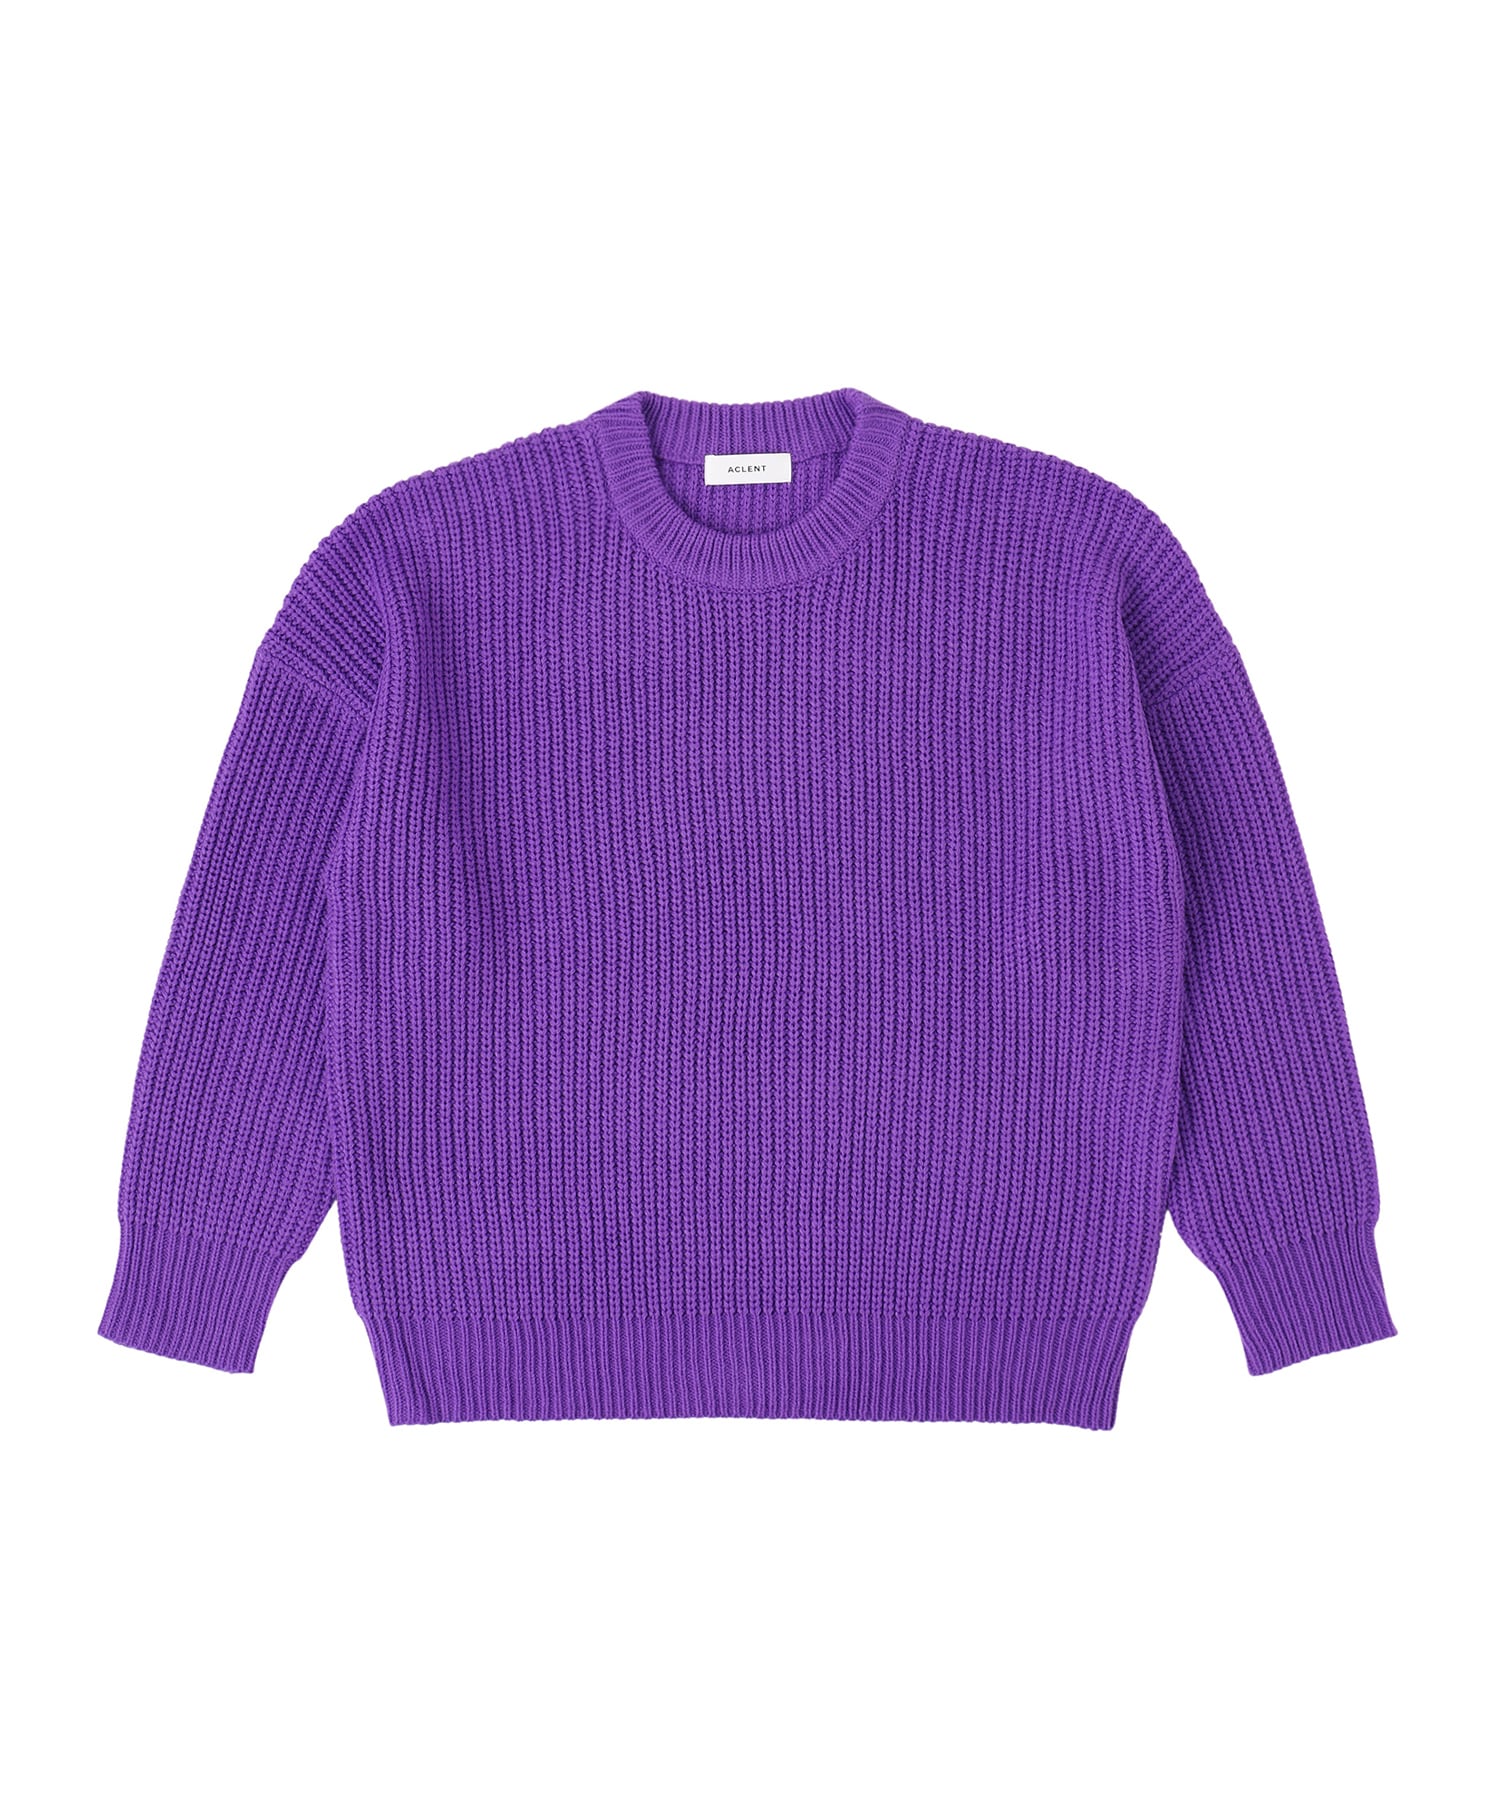 Daily color loose knit